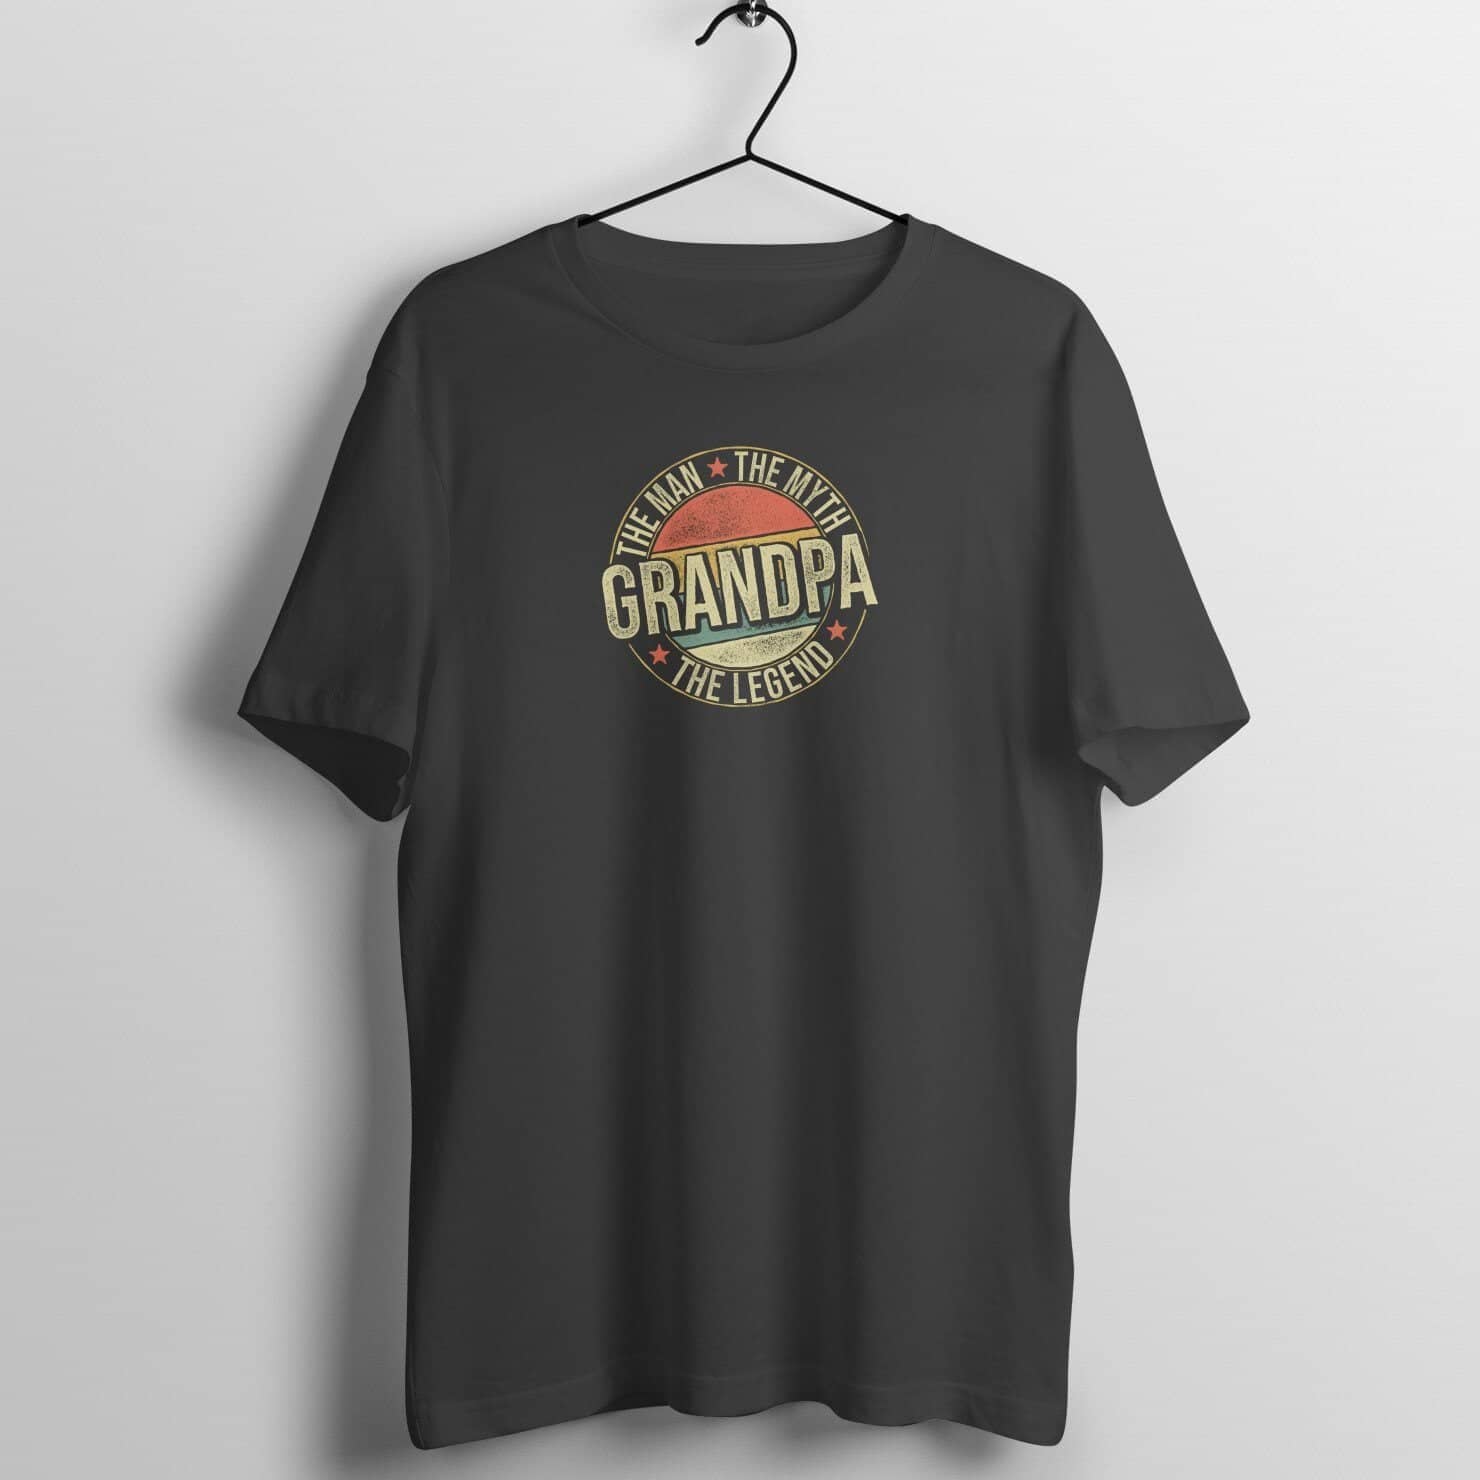 Grandpa The Man The Myth The Legend Exclusive Black T Shirt for Men - Catch My Drift India  